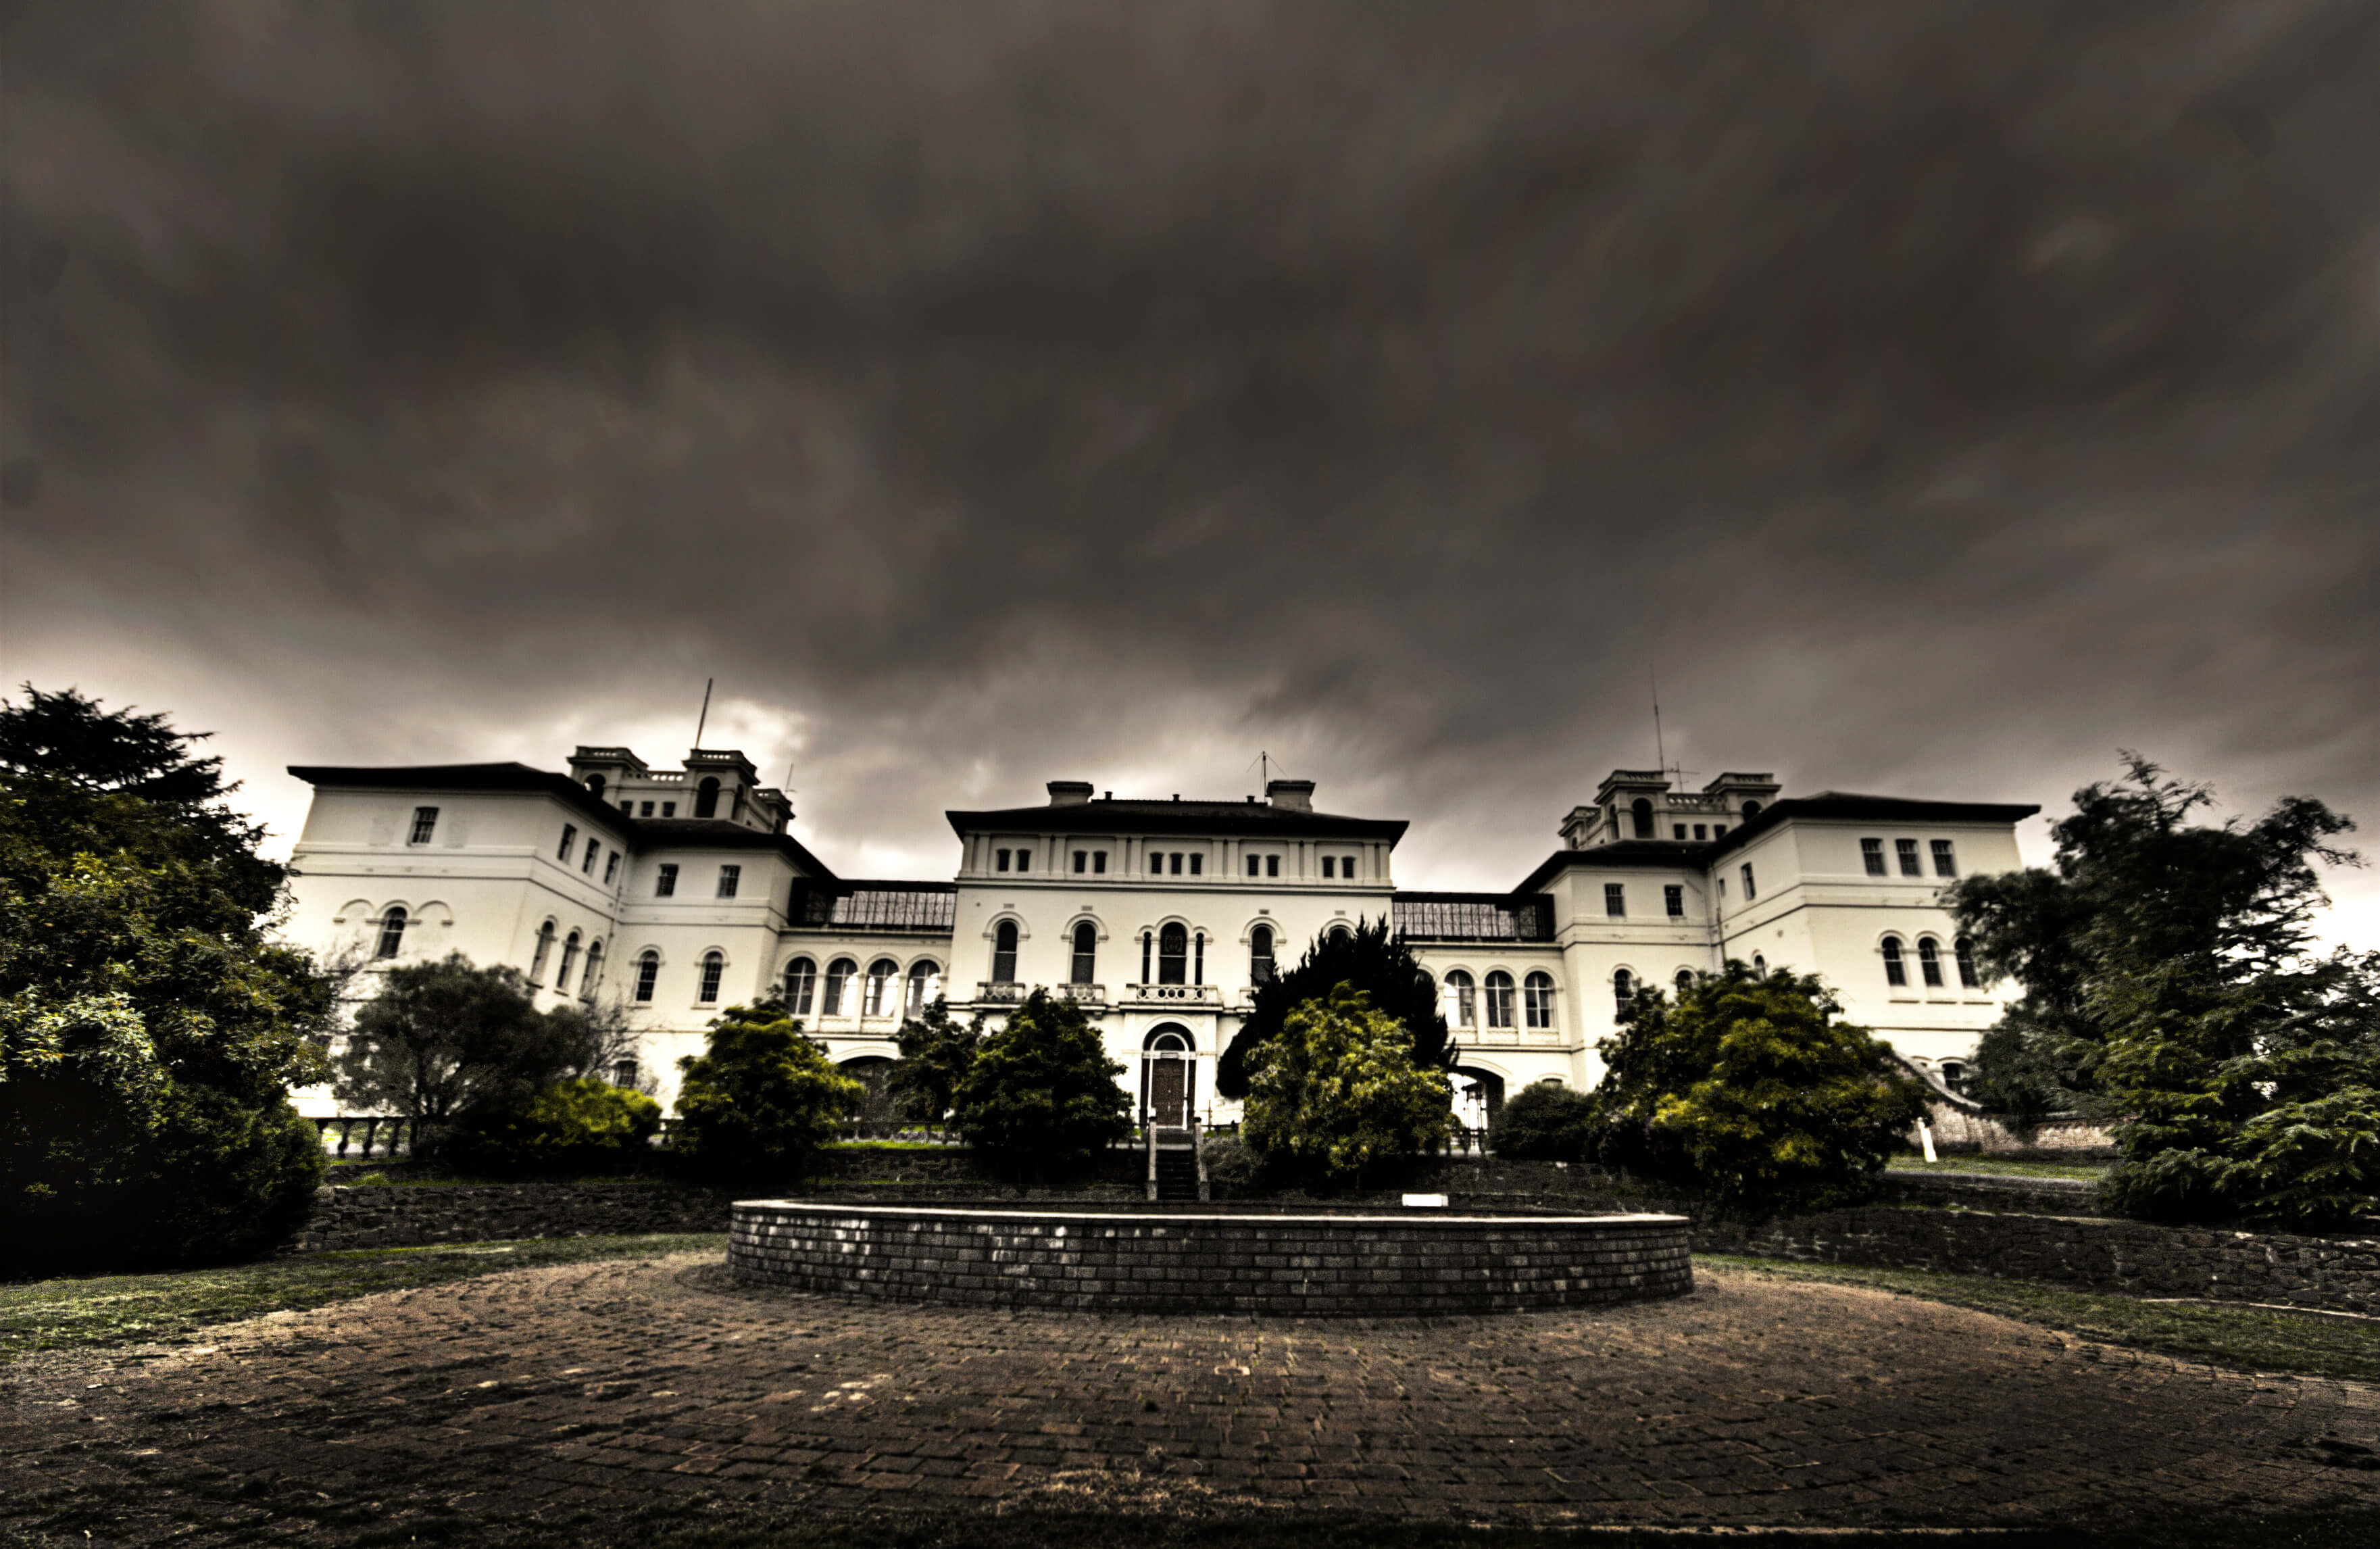 most haunted places in the world